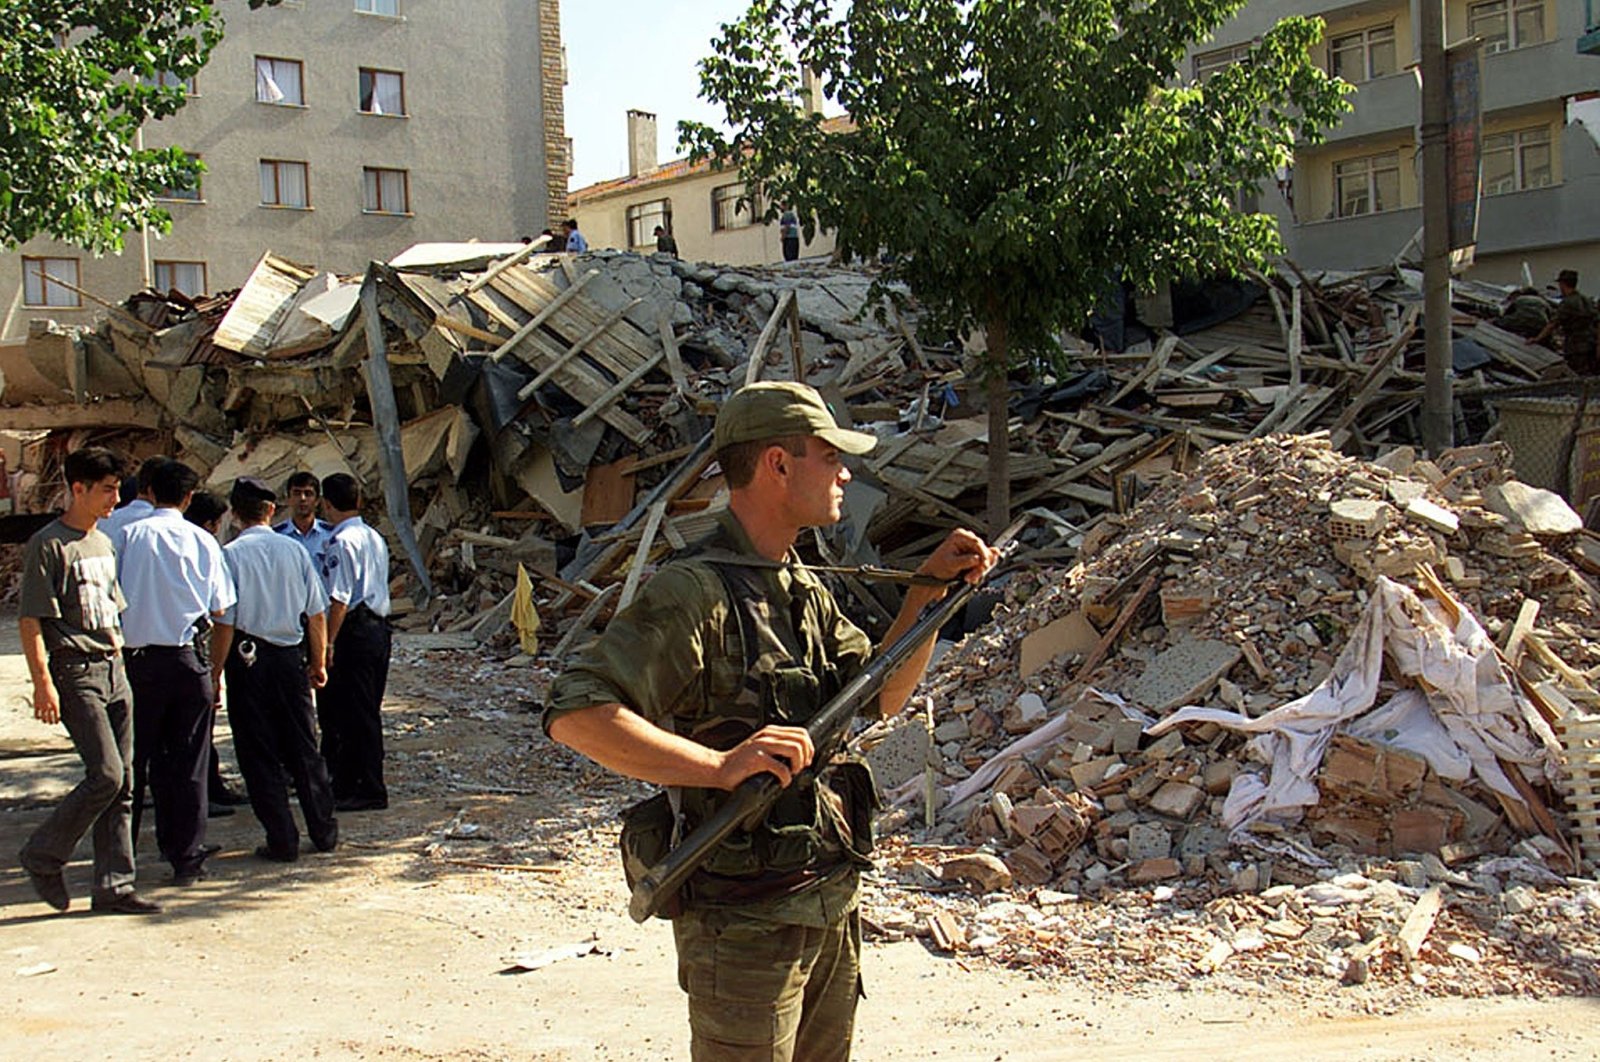 Turkish gendarme stands guard in front of rubble after an earthquake in the Avcılar district in Istanbul, Turkey, Aug. 18, 1999. (REUTERS Photo)